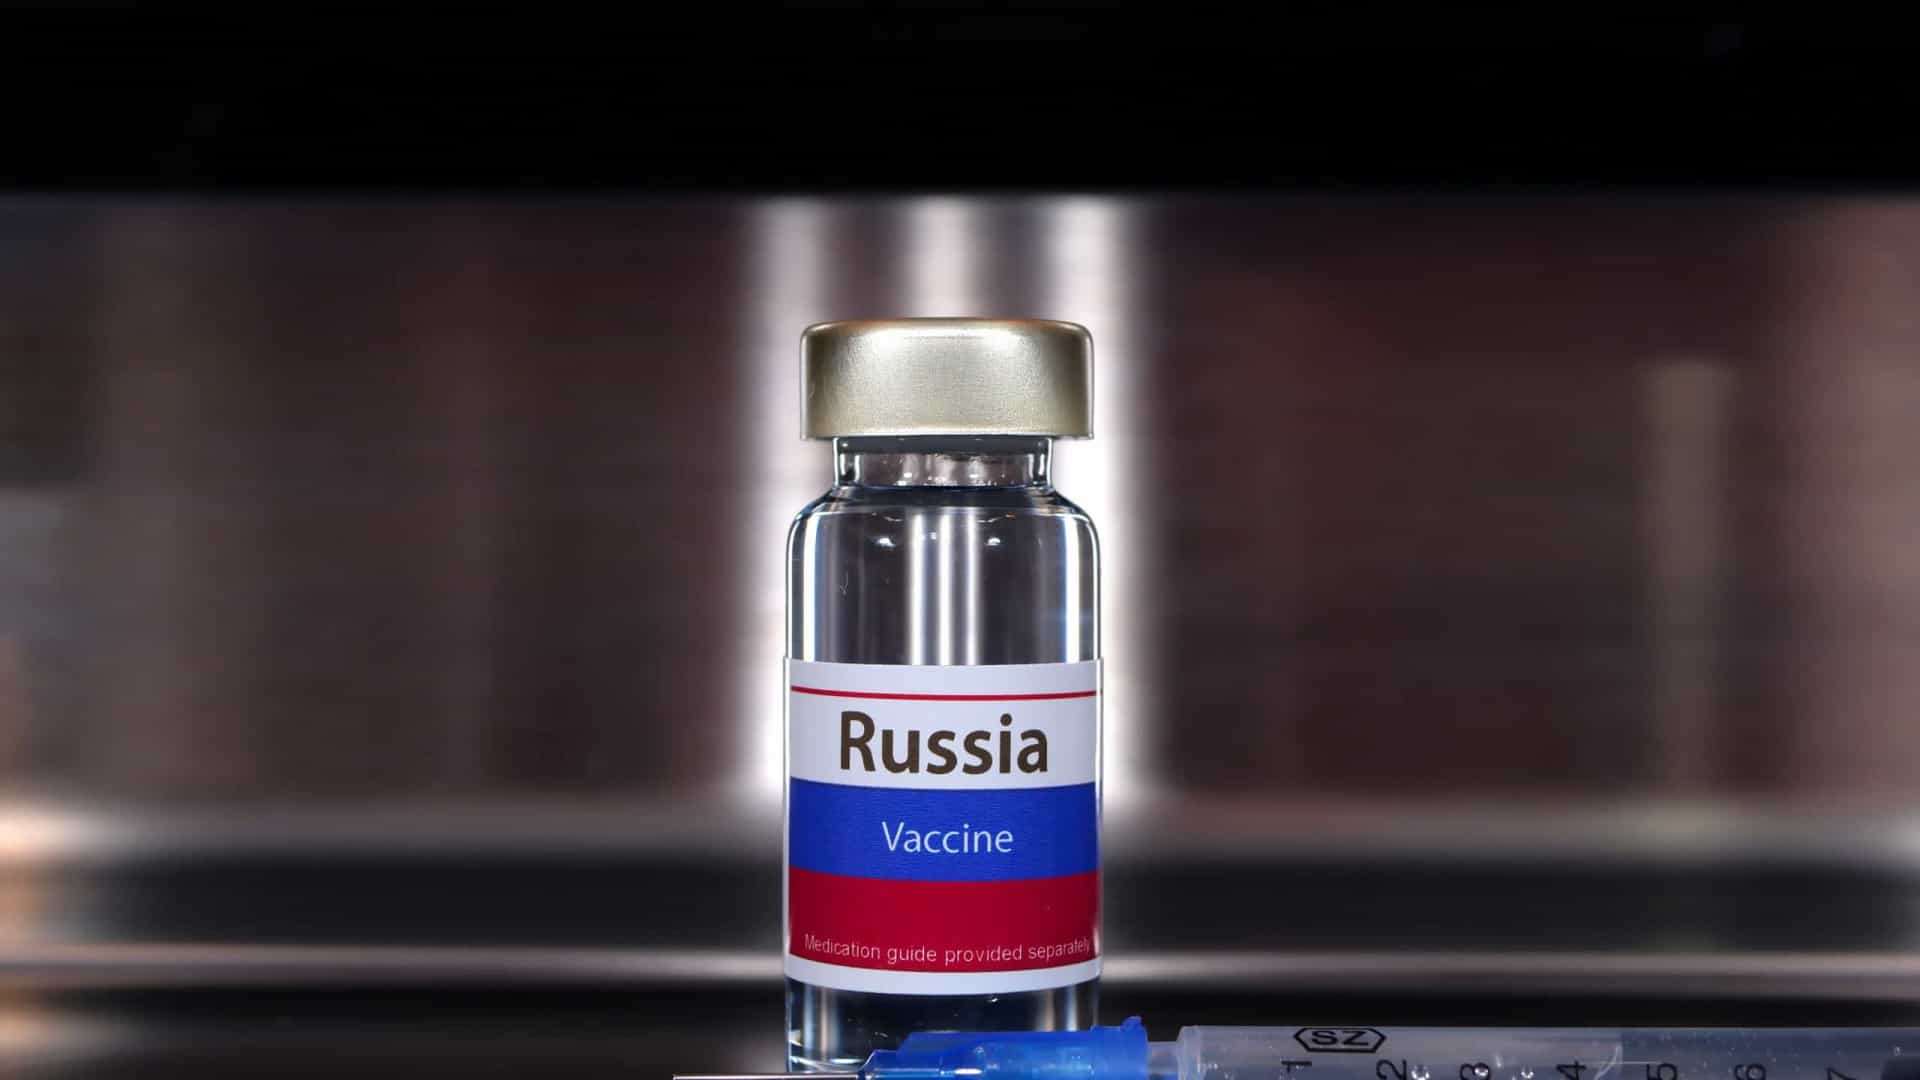 The pharmaceutical company União Química said on Friday it has signed an agreement with the Russian Direct Investment Fund (RDIF) to produce Russia’s Sputnik V vaccine against COVID-19 starting in the second half of November.